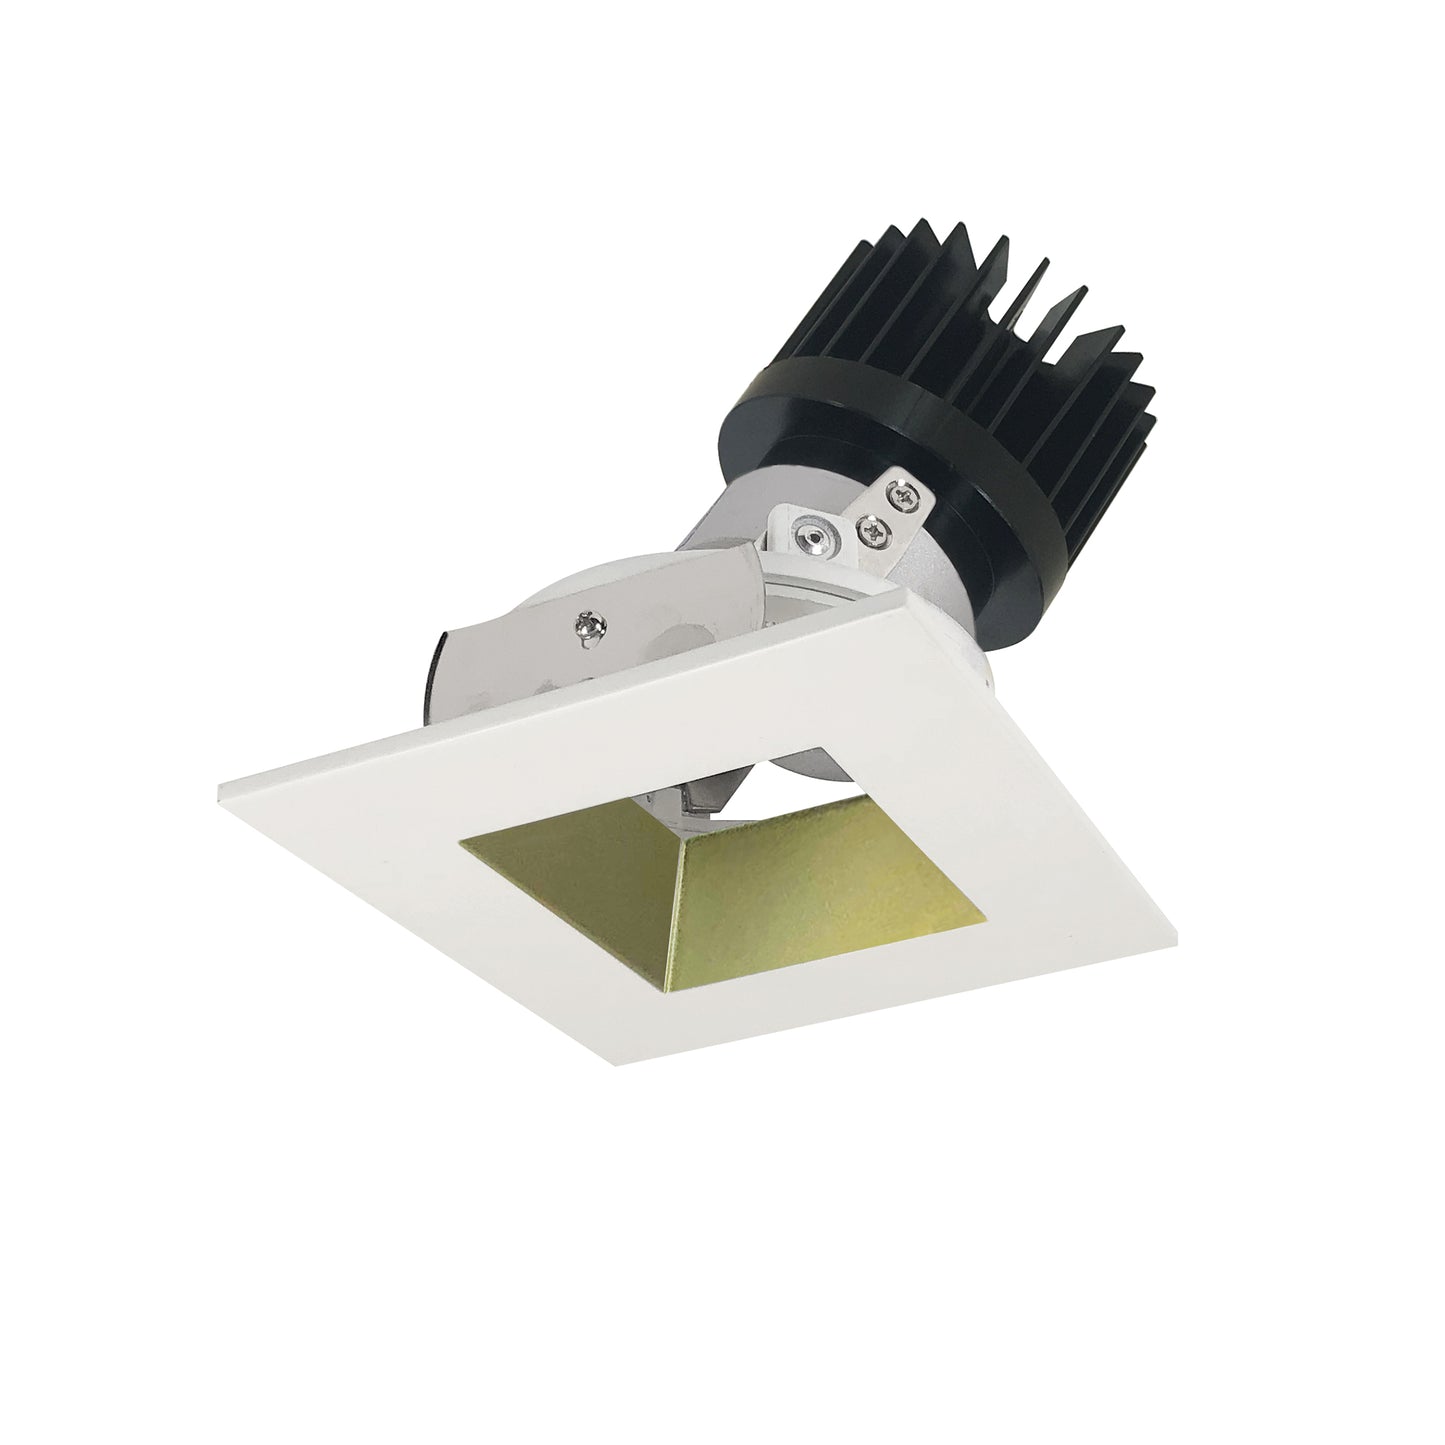 Nora Lighting 4" Iolite LED Square Adjustable Reflector with Square Aperture, 1500lm/2000lm (varies by housing), 3500K, Champagne Haze Reflector / Matte Powder White Flange NIO-4SDSQ35XCHMPW/HL